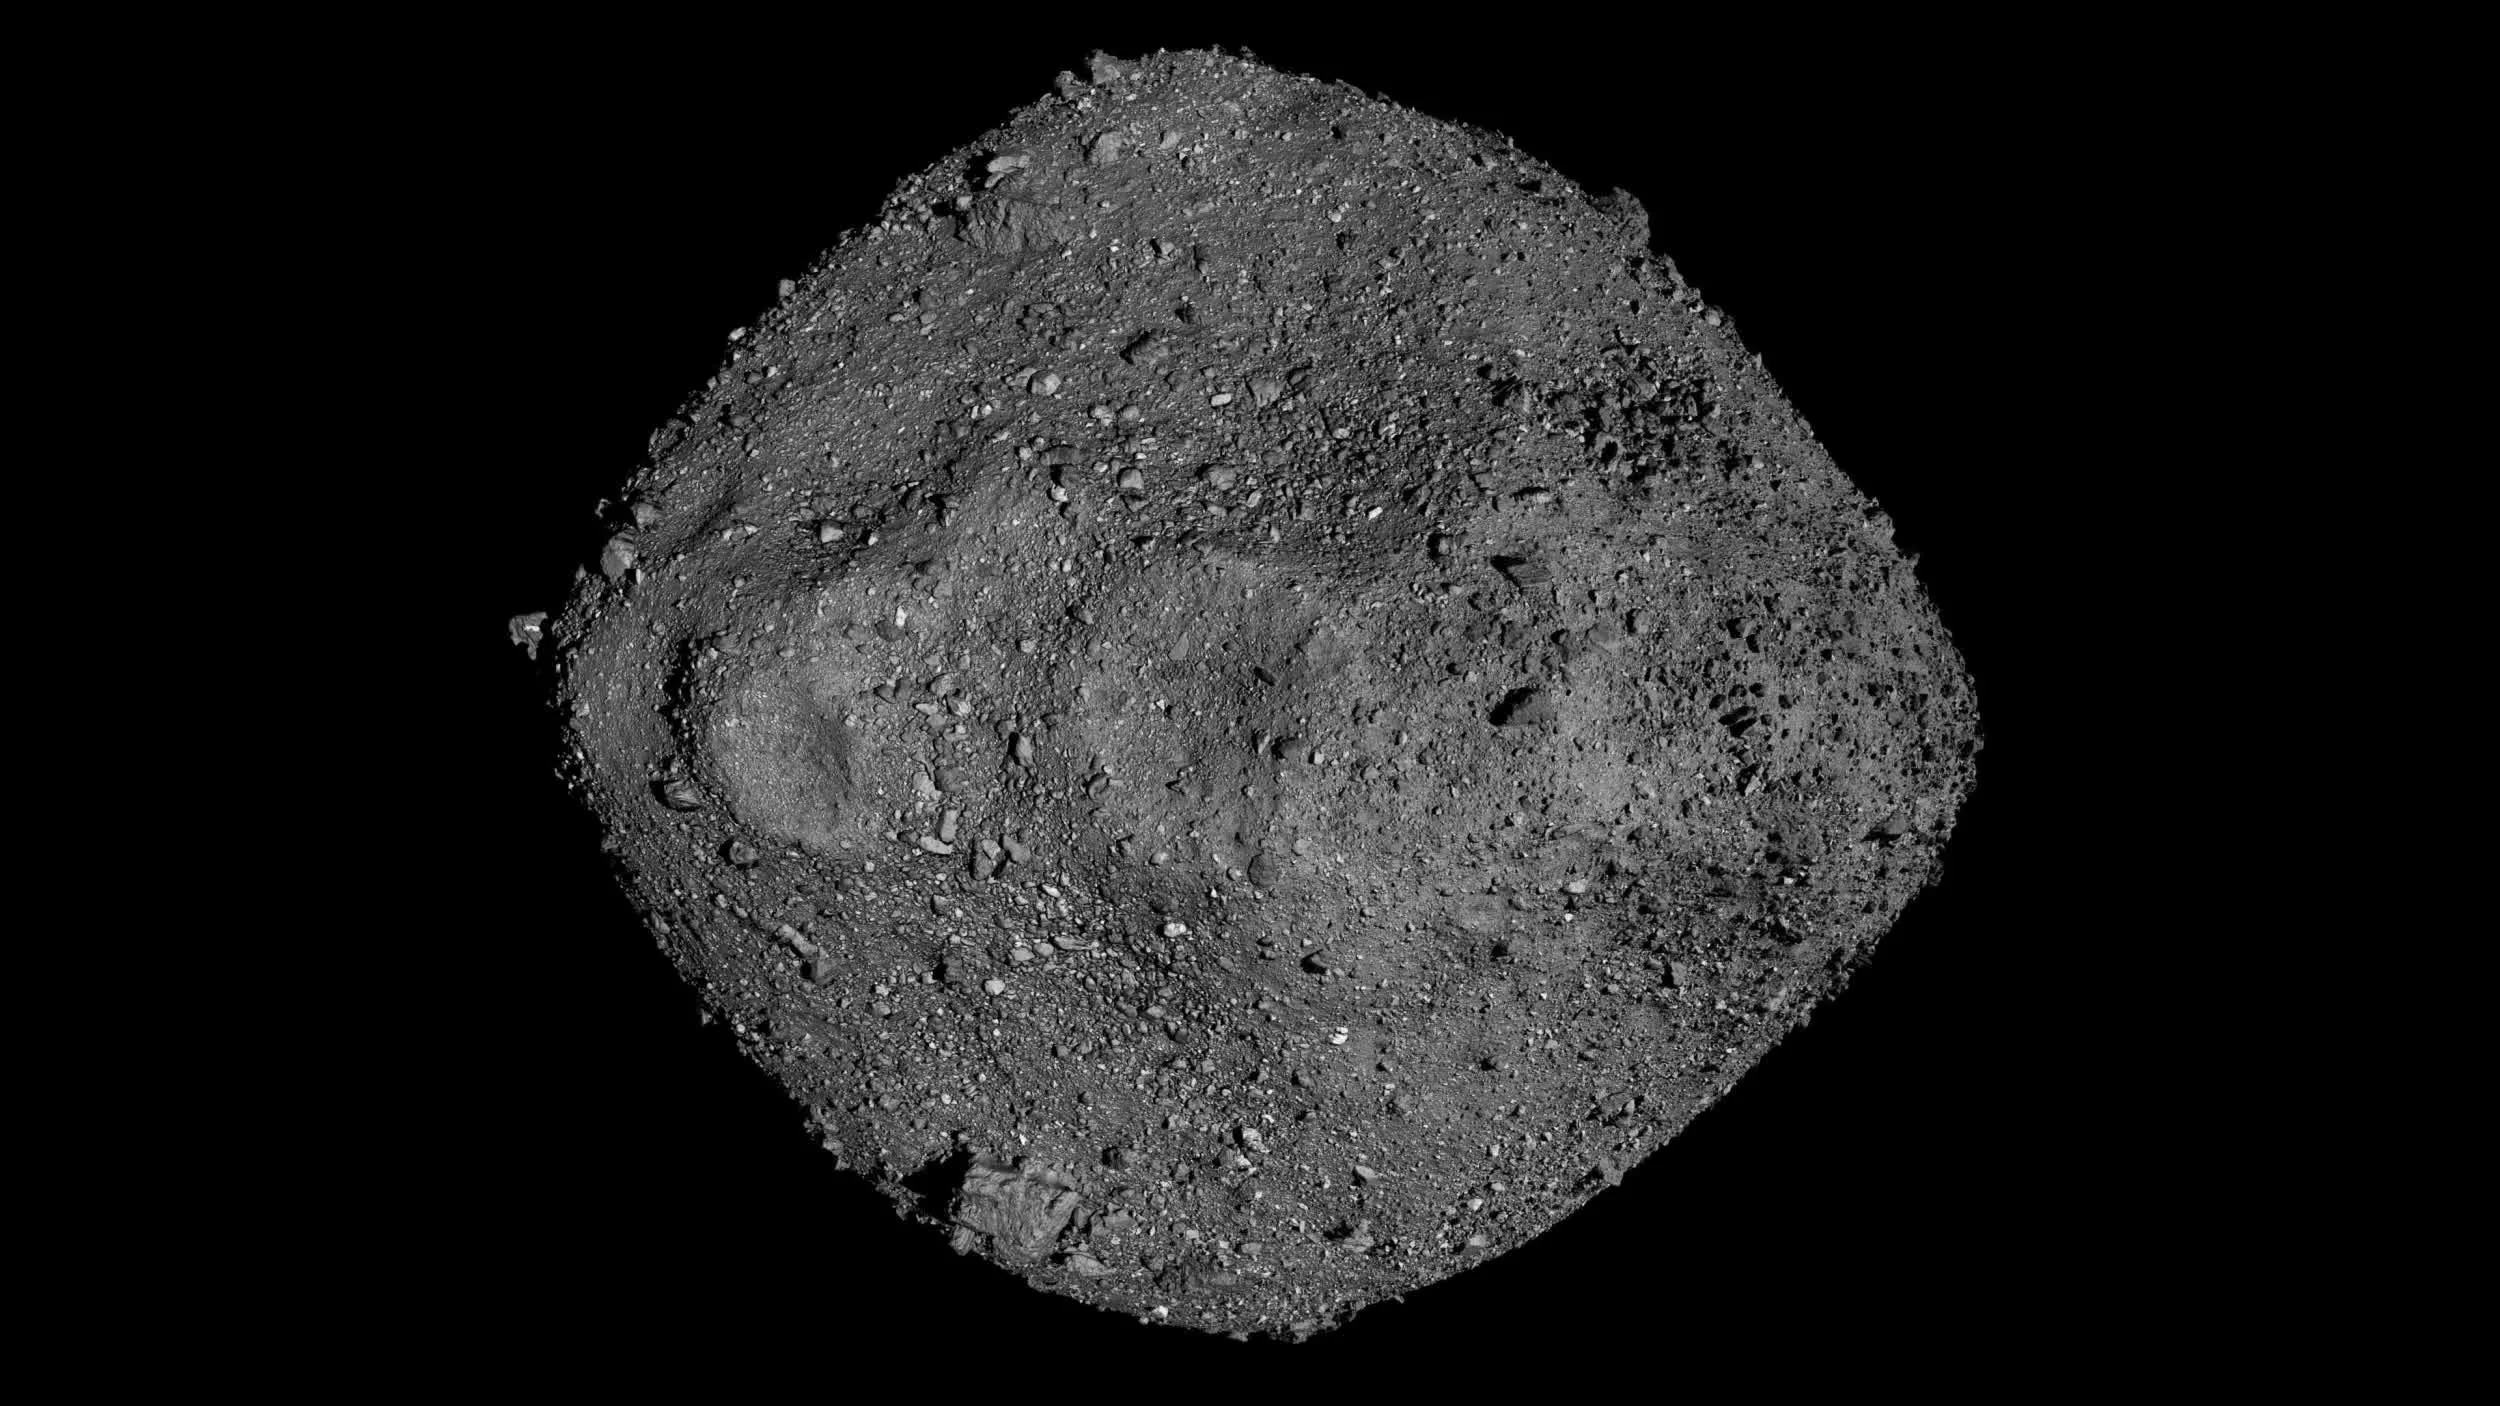 Scientists share initial analysis of samples from asteroid Ryugu